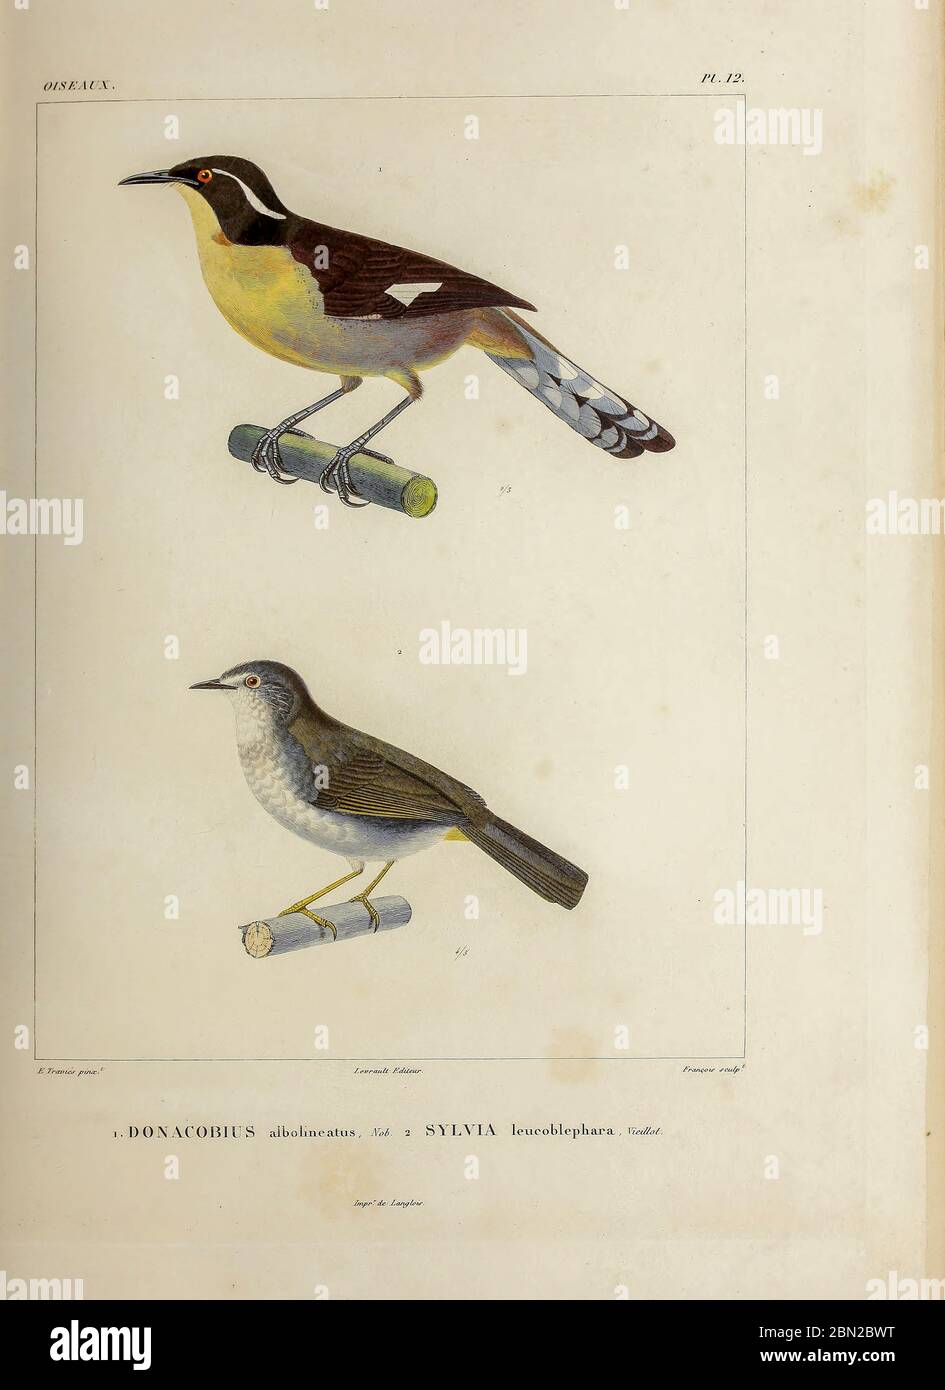 hand coloured sketch top: Black-capped Donacobius (Donacobius atricapilla albovittatus [Here as Donacobius albolineatus]) Bottom: white-rimmed warbler or white-browed warbler (Myiothlypis leucoblephara [Here as Sylvia leucoblephara]) From the book 'Voyage dans l'Amérique Méridionale' [Journey to South America: (Brazil, the eastern republic of Uruguay, the Argentine Republic, Patagonia, the republic of Chile, the republic of Bolivia, the republic of Peru), executed during the years 1826 - 1833] 4th volume Part 3 By: Orbigny, Alcide Dessalines d', d'Orbigny, 1802-1857; Montagne, Jean François C Stock Photo